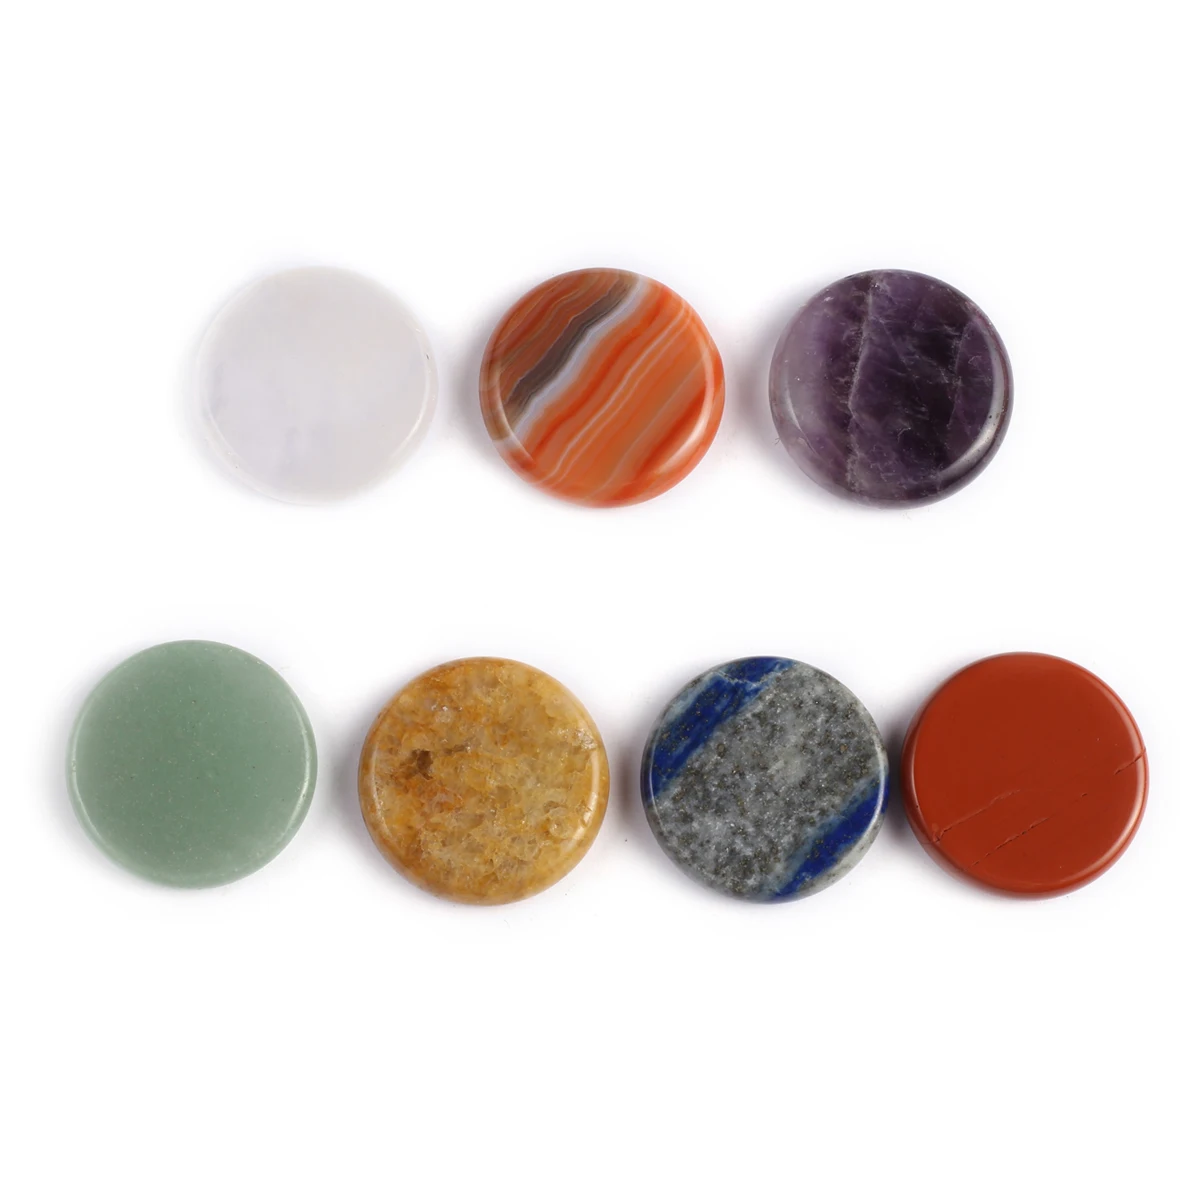 

7pcs Natural Agates Stone Beads Mix Color Chakra Stone Loose Beaded Healing for Making DIY Jewelry Necklace Bracelet Accessories